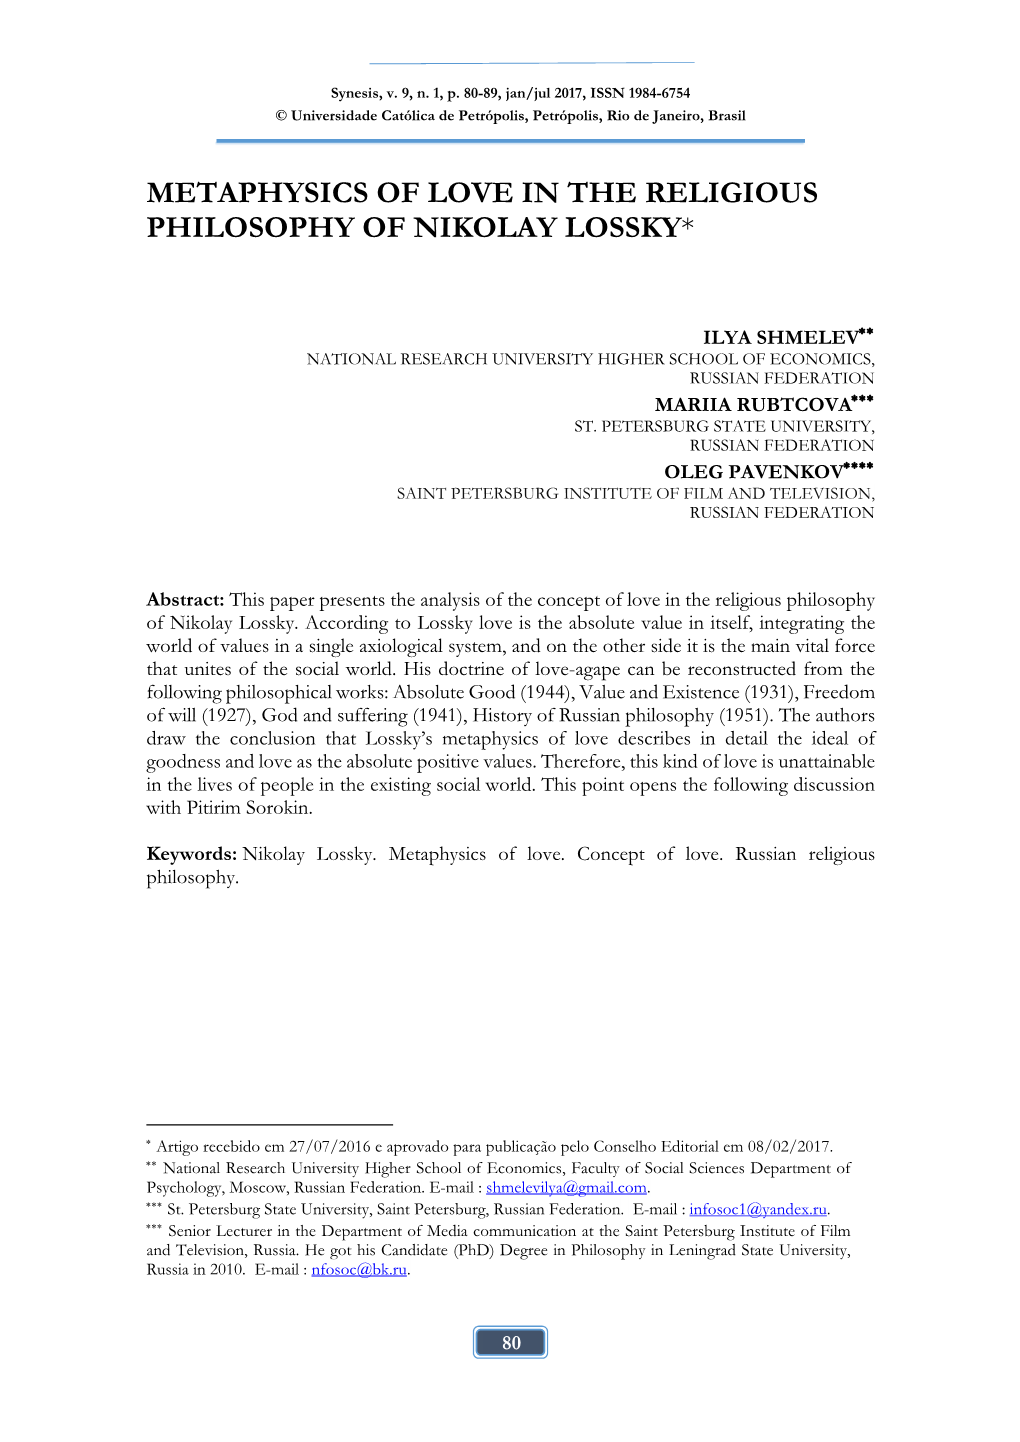 Metaphysics of Love in the Religious Philosophy of Nikolay Lossky*